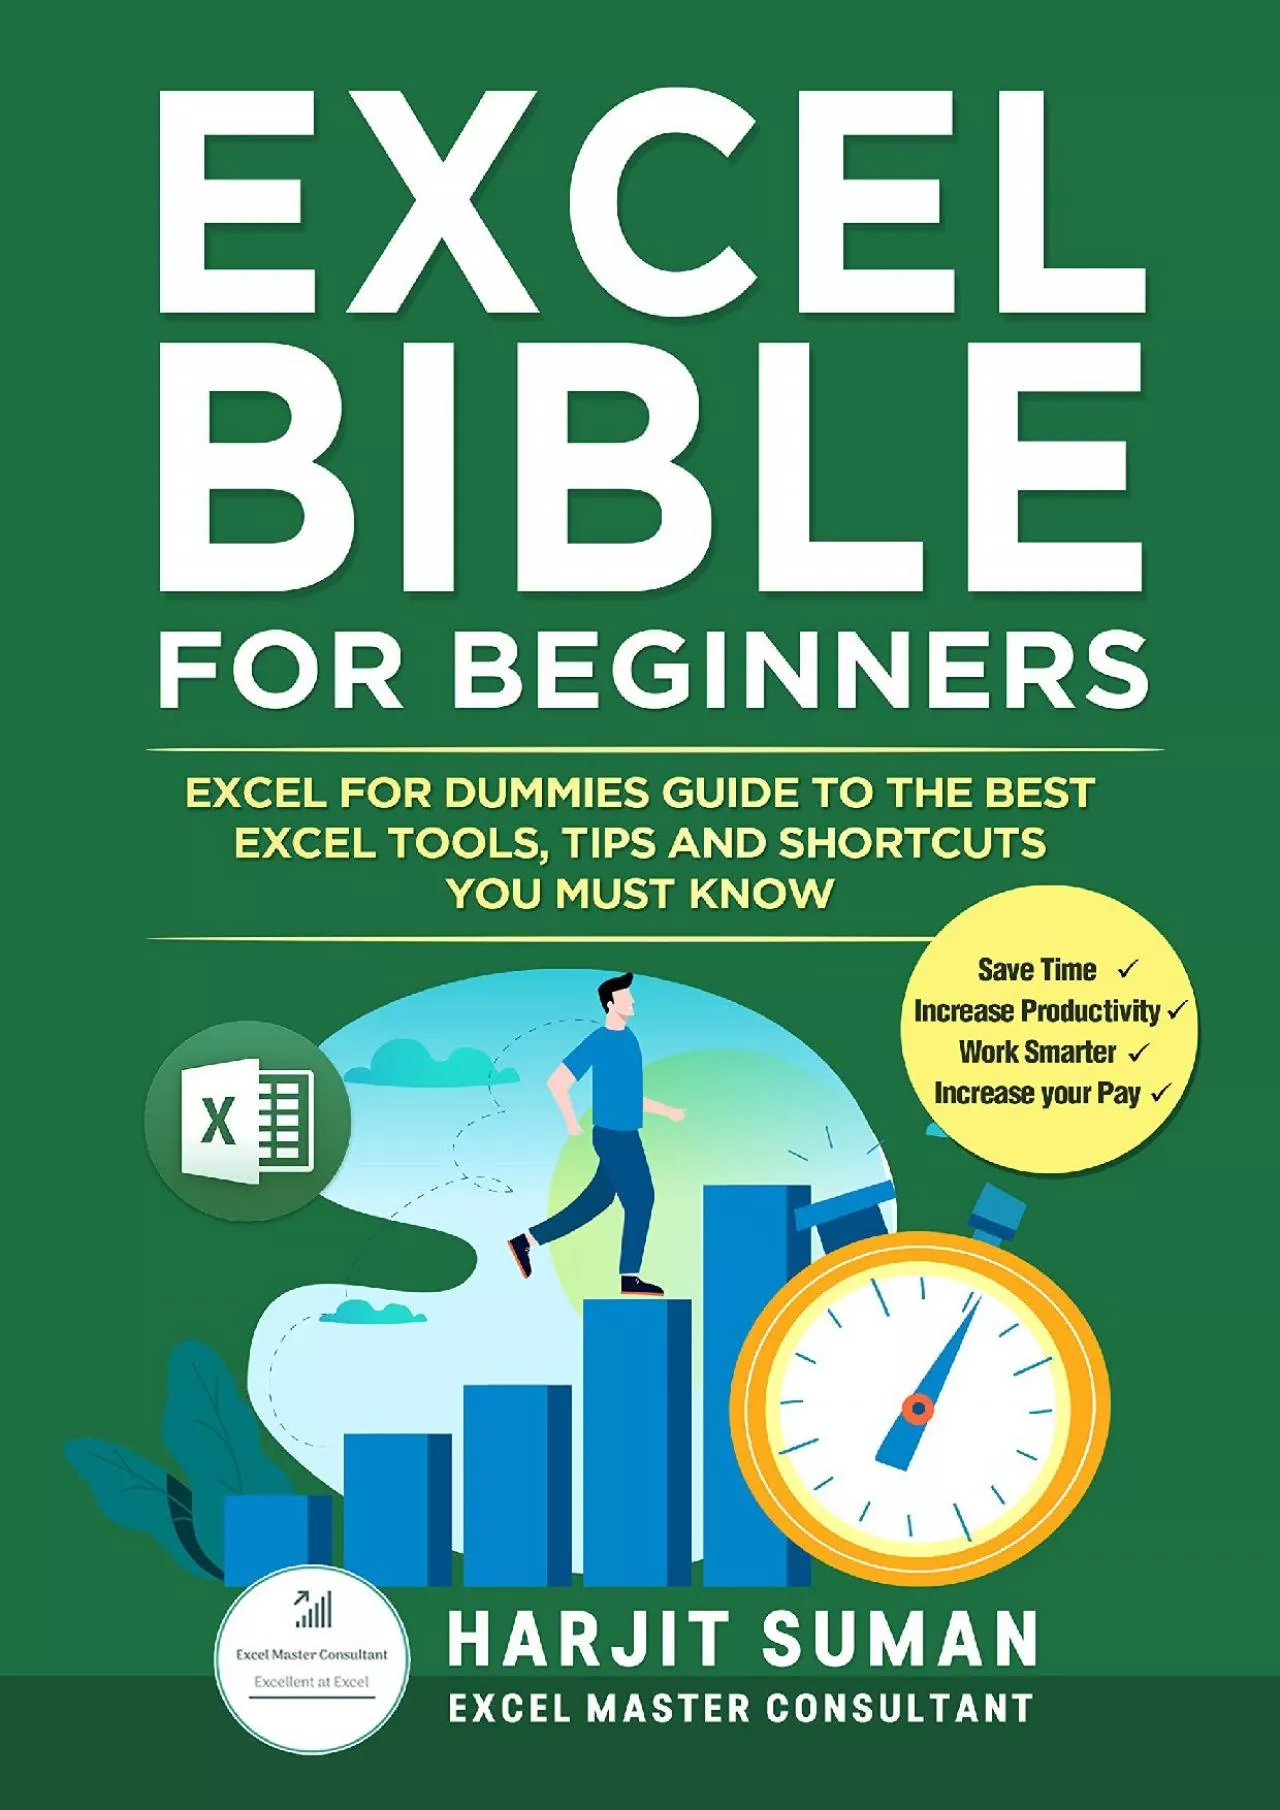 (BOOK)-Excel Bible for Beginners: Excel for Dummies Guide to the Best Excel Tools, Tips